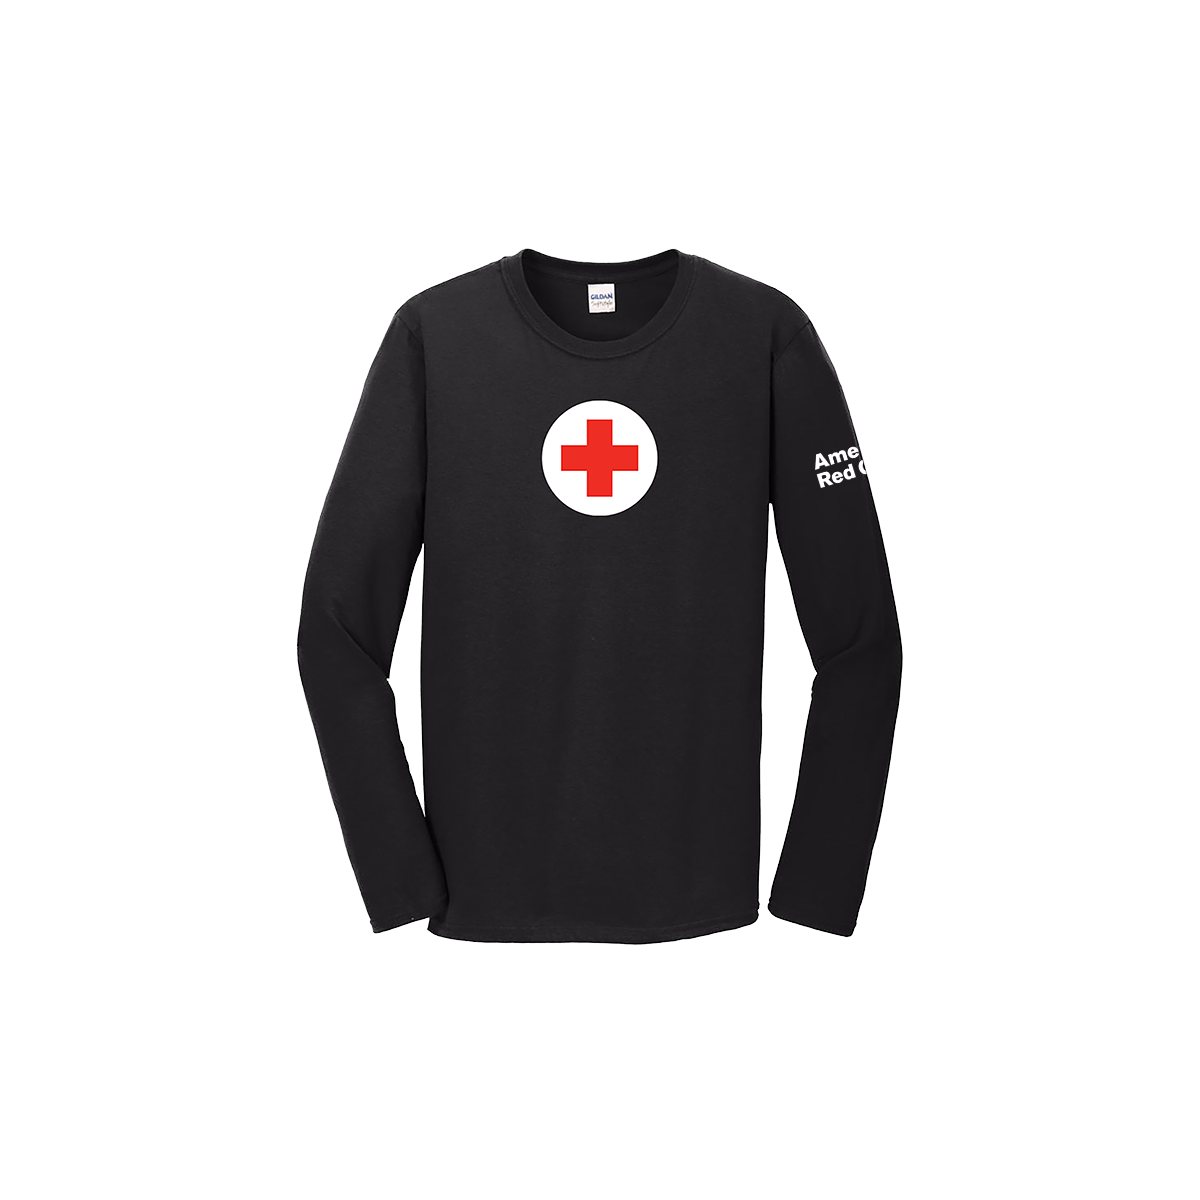 Classic American Red Cross Logo - Unisex Cotton Long Sleeve T-Shirt with Logo | Red Cross Store